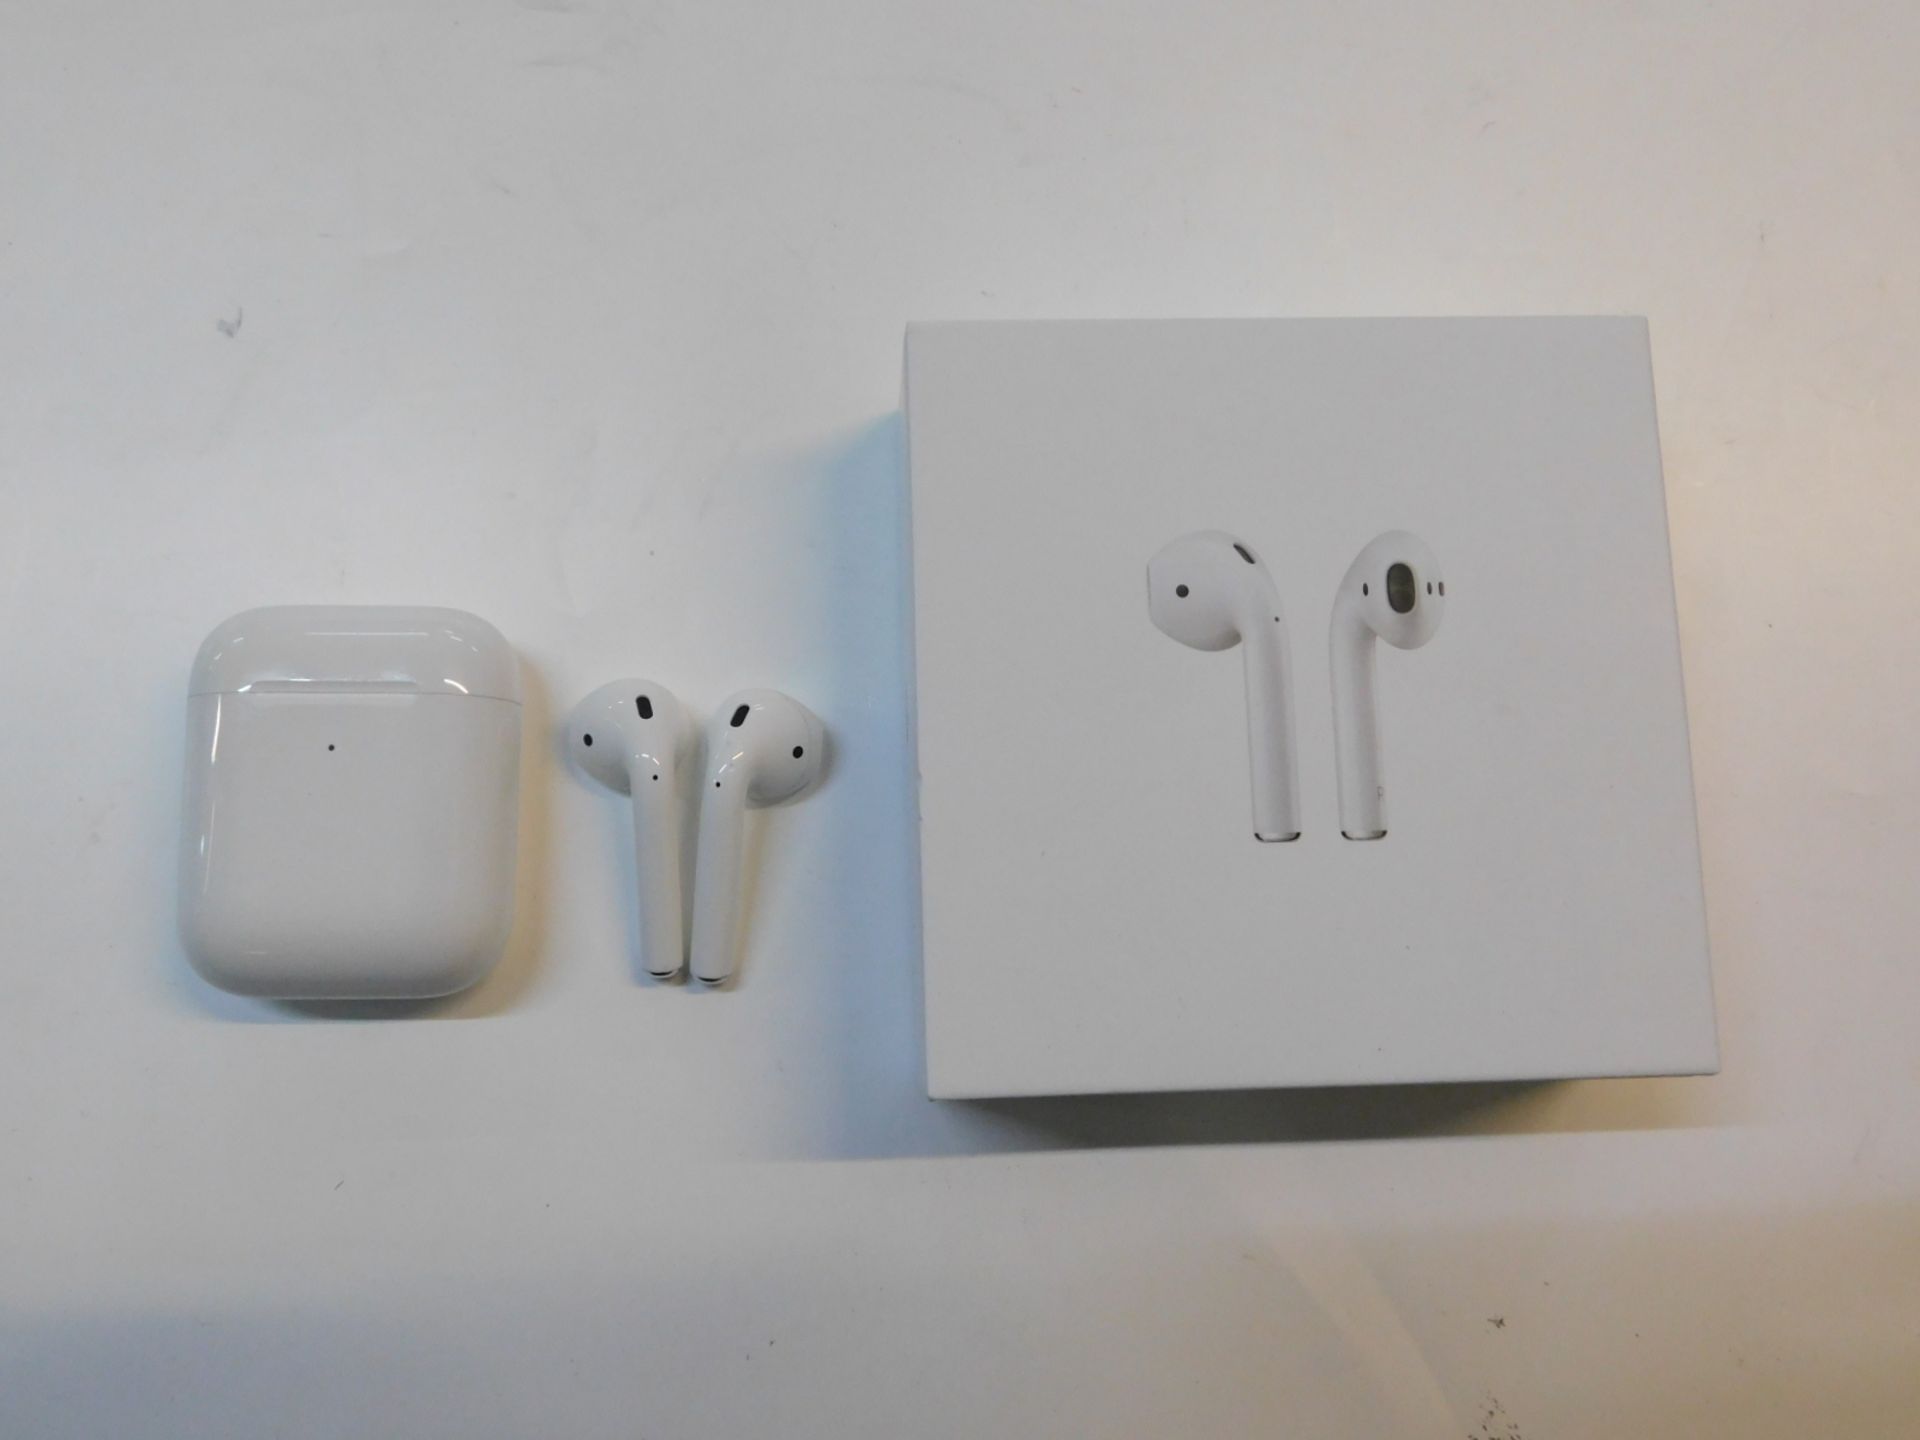 1 BOXED PAIR OF APPLE AIRPODS 2ND GENERATION BLUETOOTH EARPHONES WITH WIRLESS CHARGING CASE RRP Â£